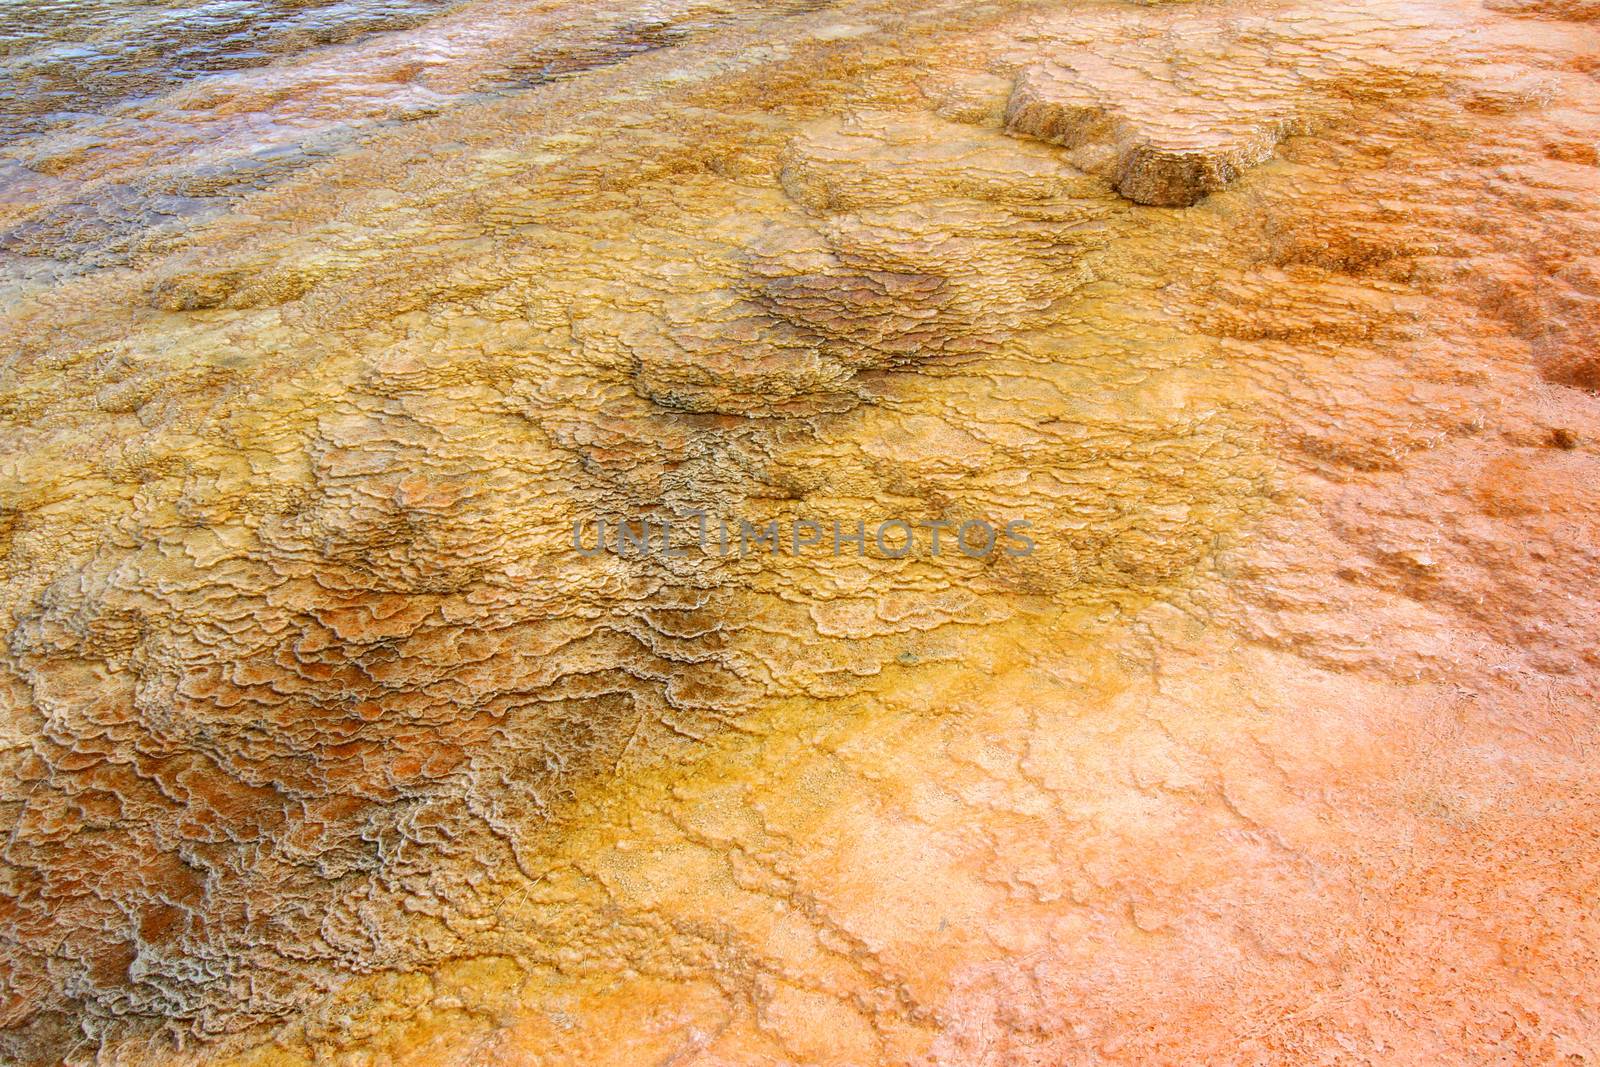 Thermophilic bacteria create a colorful bottom in Mammoth Hot Springs of Yellowstone National Park.